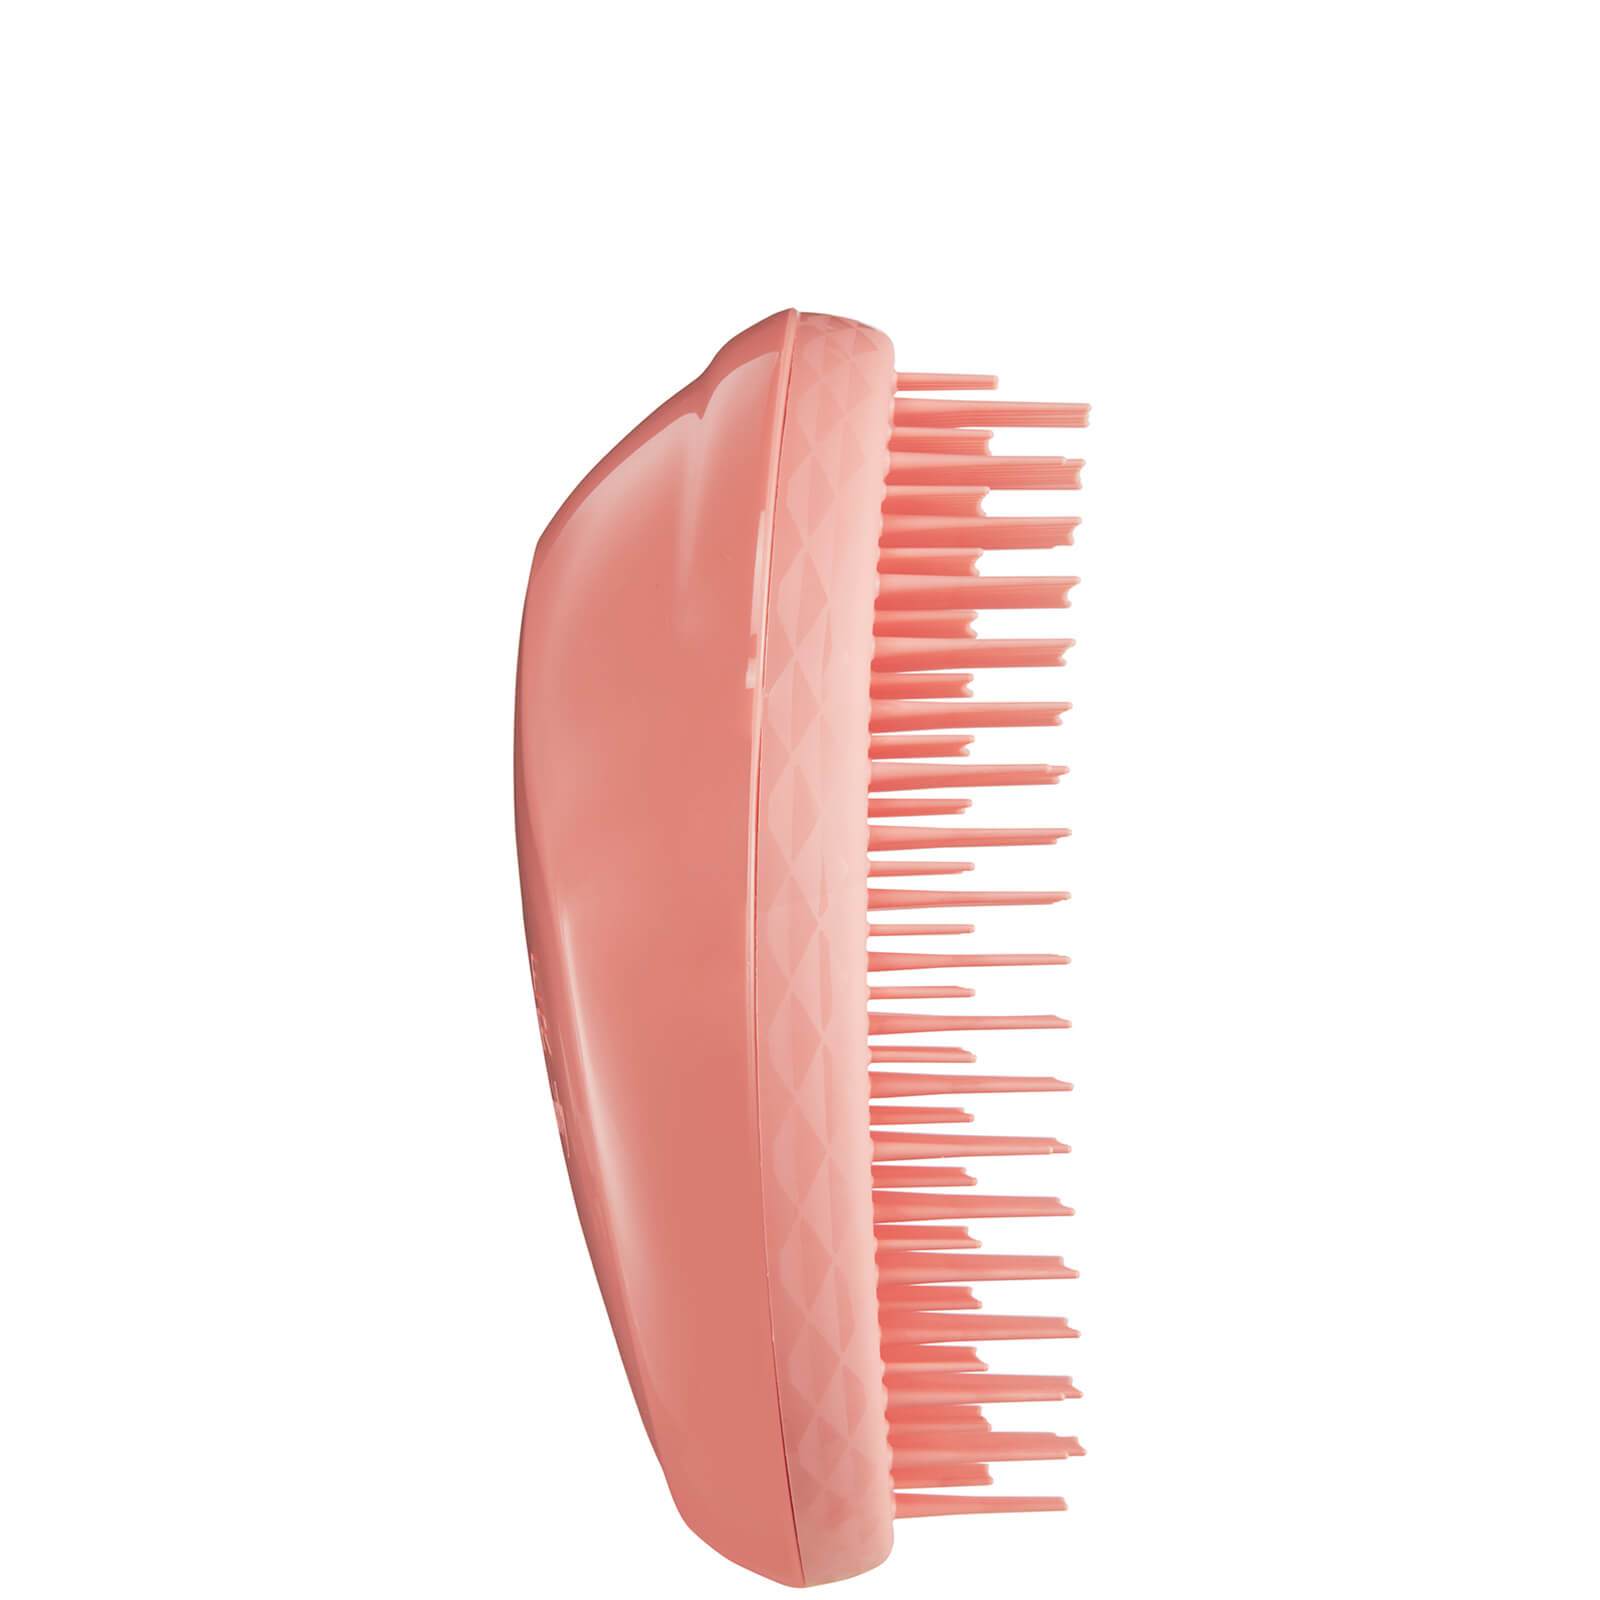 Tangle Teezer Thick and Curly Hairbrush - Terracotta